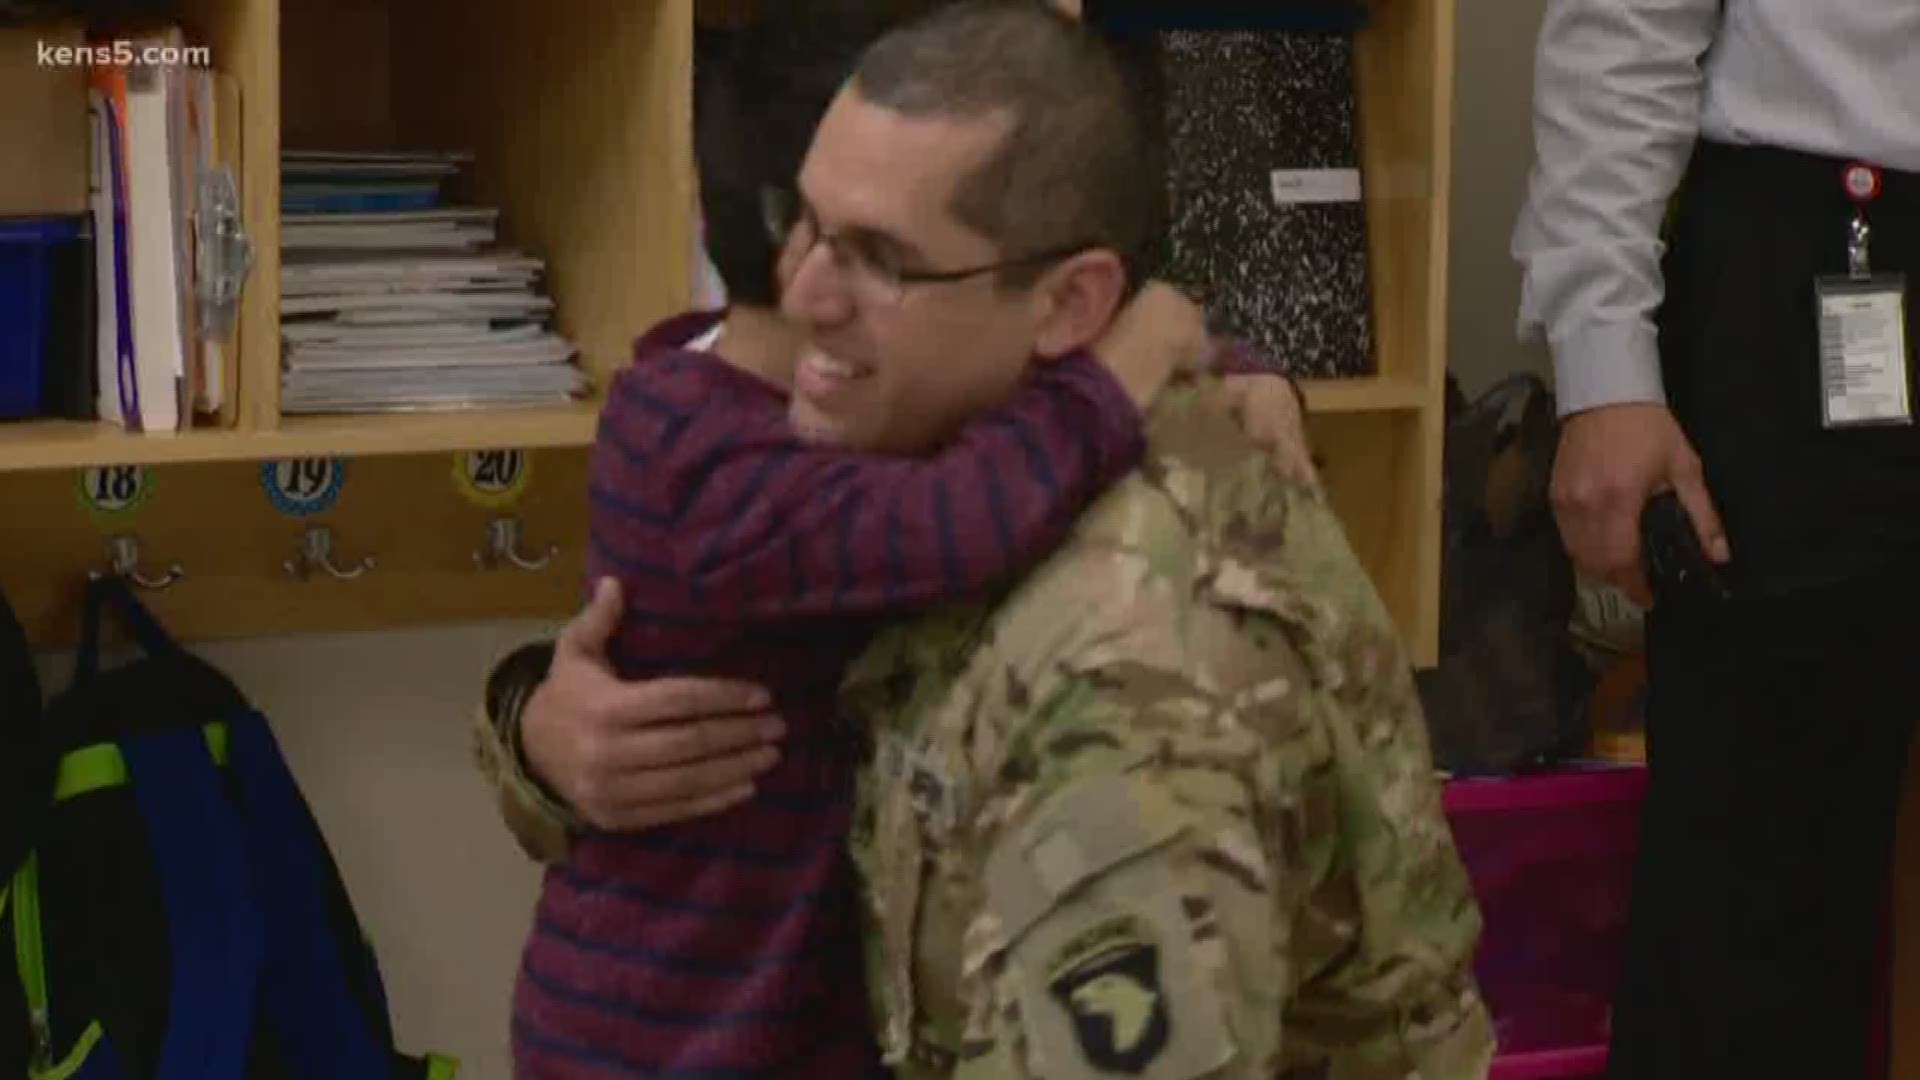 After being separated from their deployed father for thousands of miles for almost a year, two San Antonio kids received the surprise of a life on Wednesday.